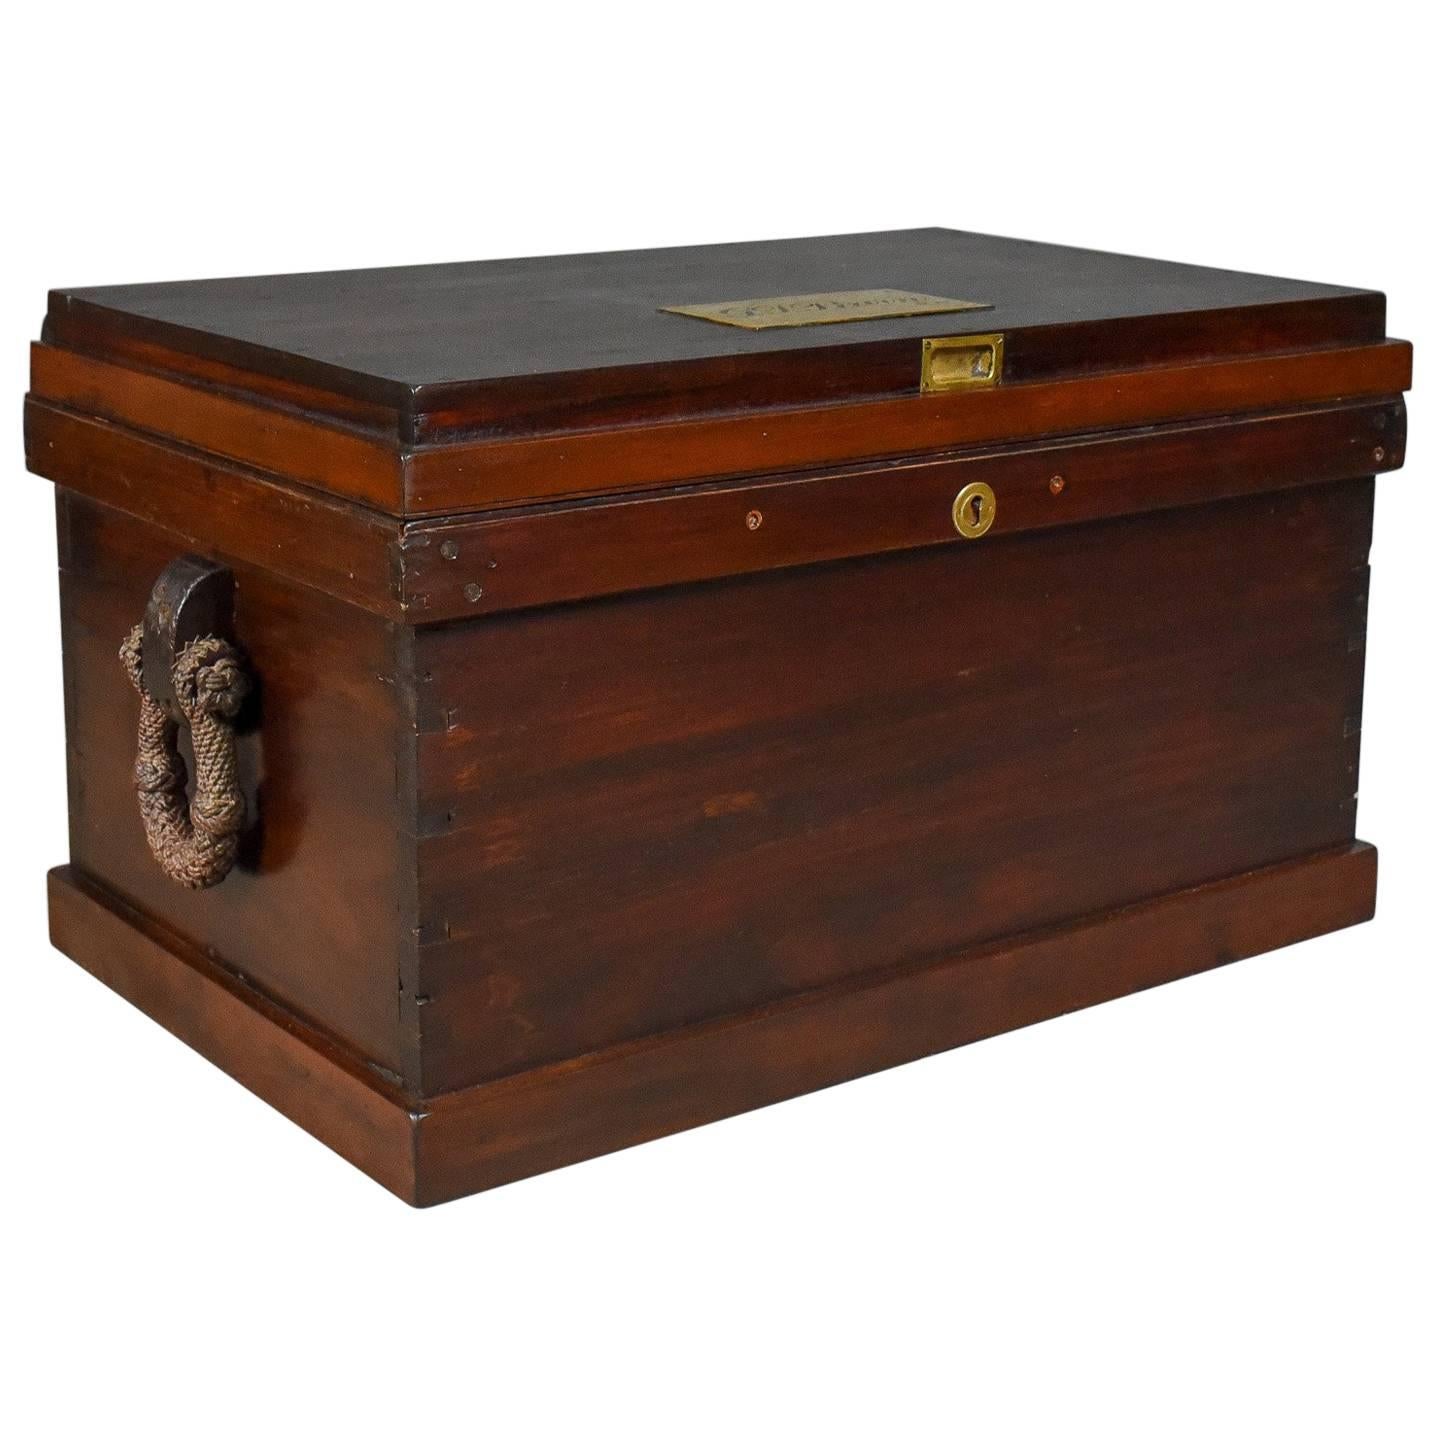 Antique Royal Navy Officer's Trunk, Early 19th Century Mahogany Chest circa 1800